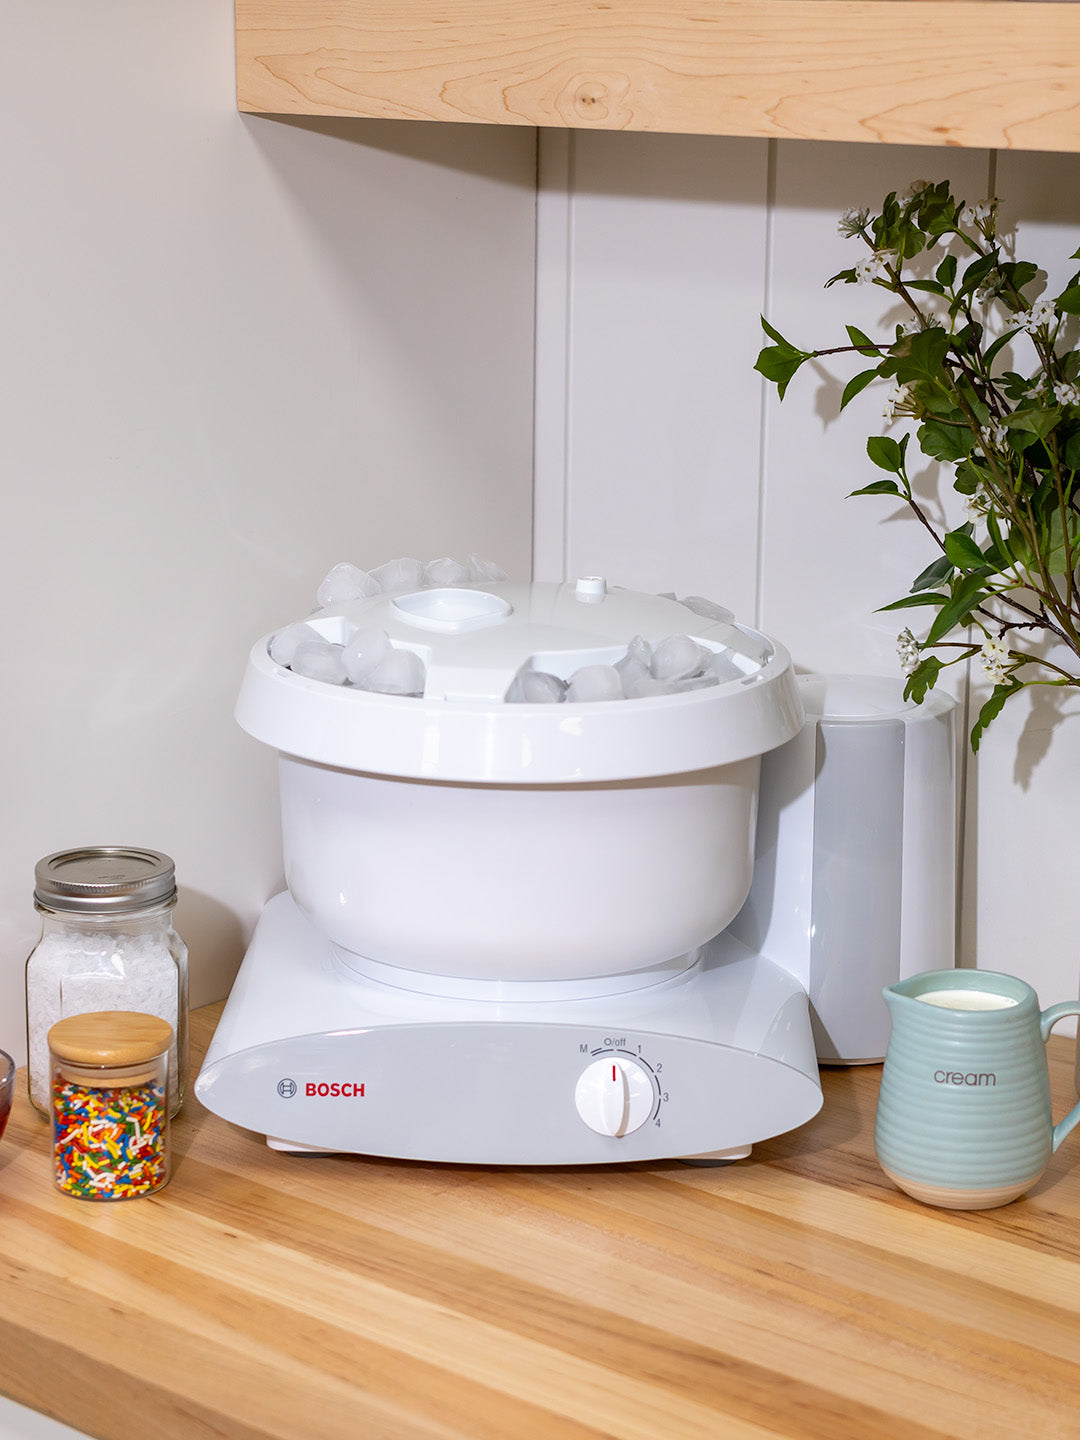 The Ultimate Guide to the Bosch Universal Plus Mixer + Review